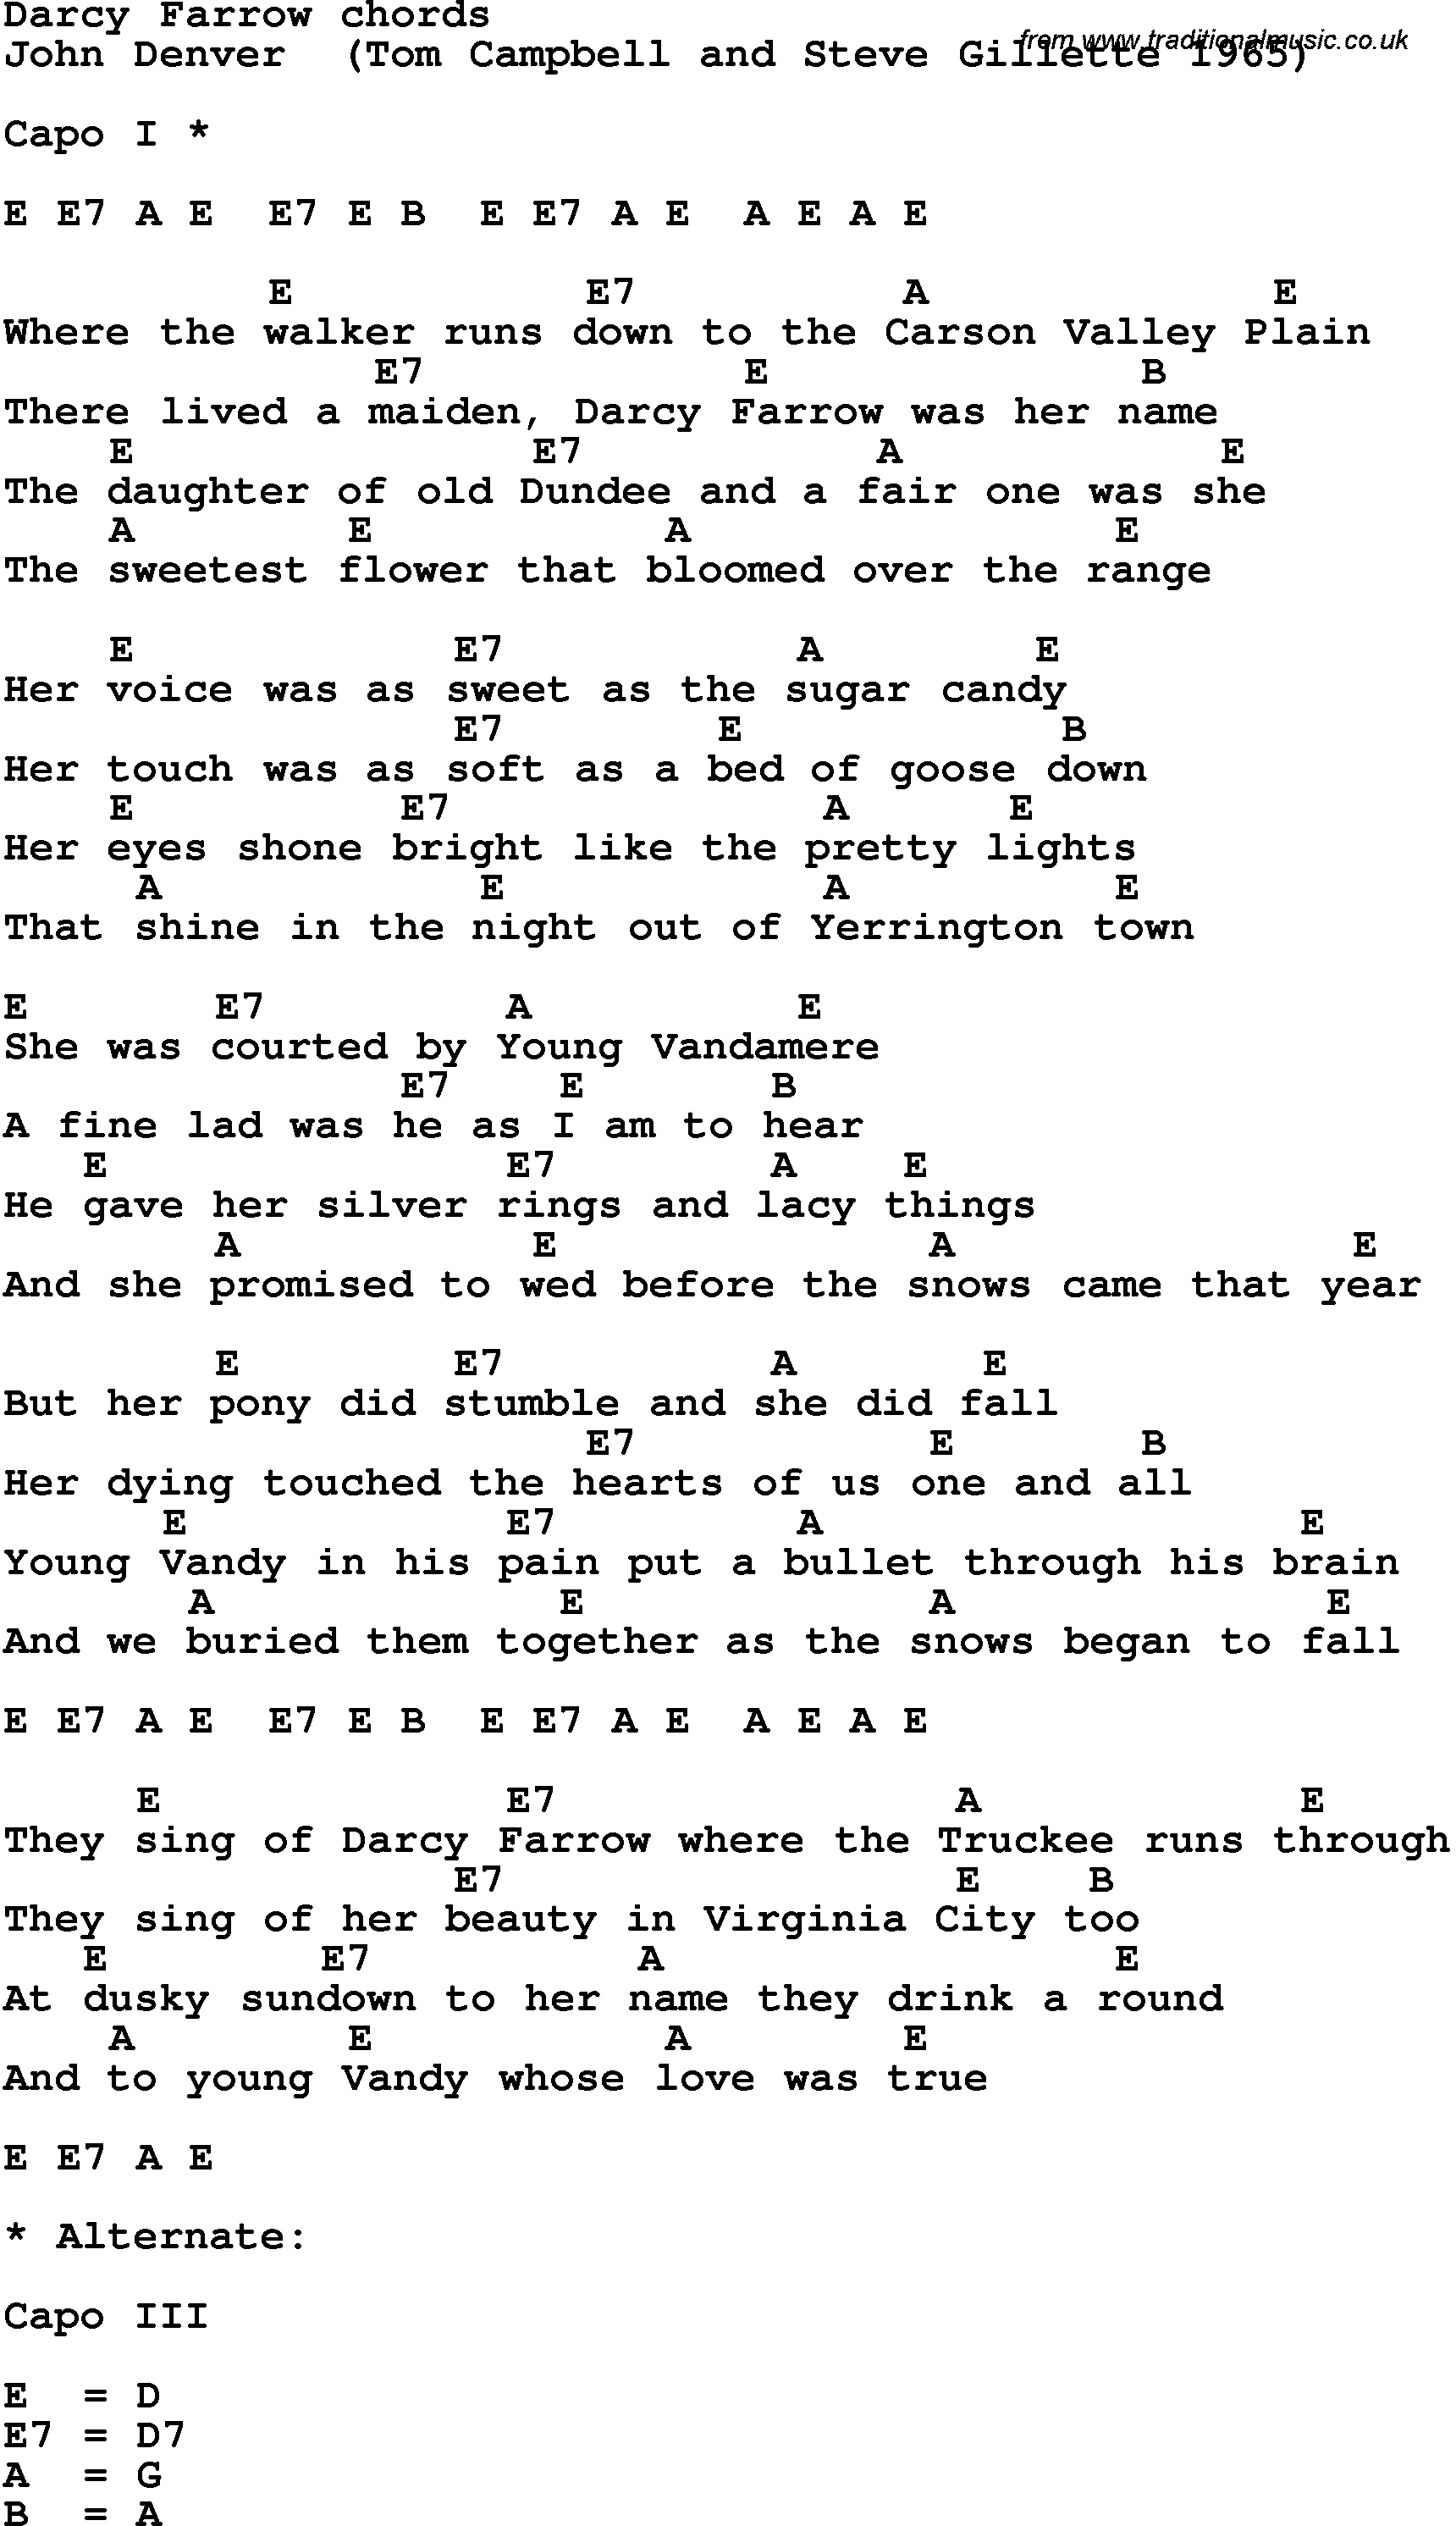 Song Lyrics with guitar chords for Darcy Farrow